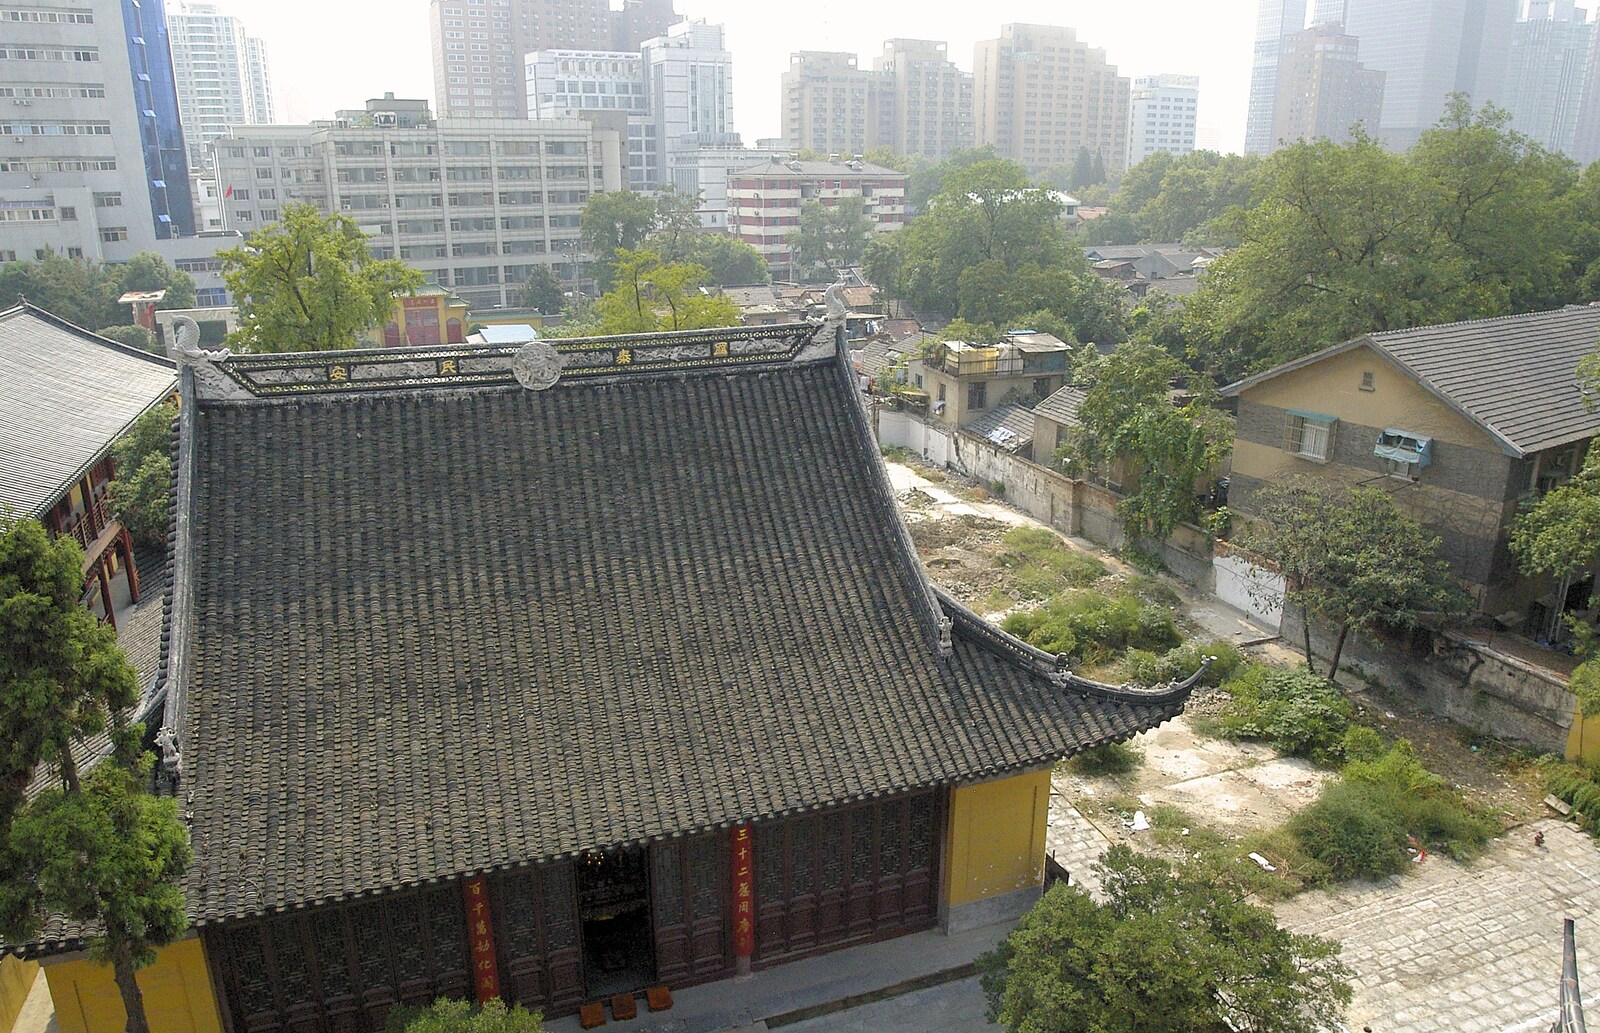 A view from the top of the temple from A Few Days in Nanjing, Jiangsu Province, China - 7th October 2006